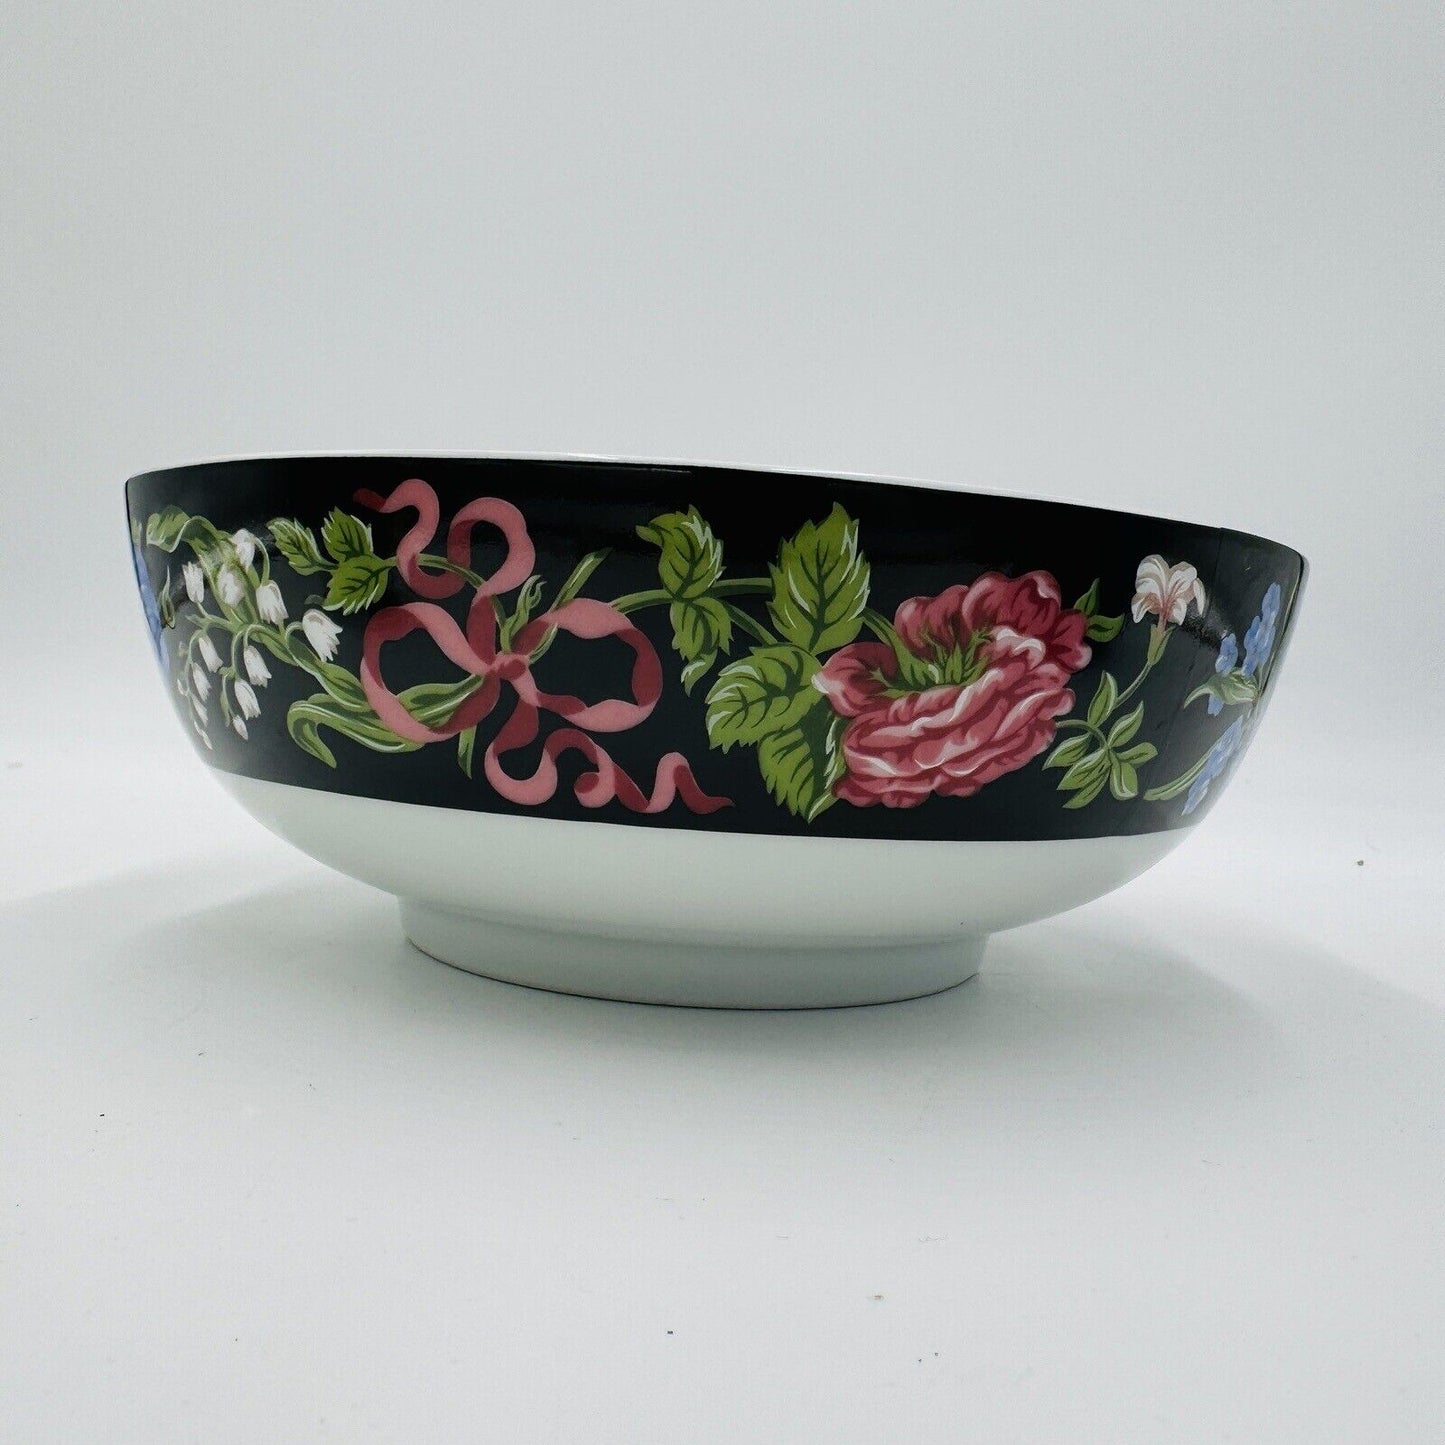 Tiffany & Co. Merrion Square by Sybil Connolly Floral Porcelain Bowl 3inH x 8inW